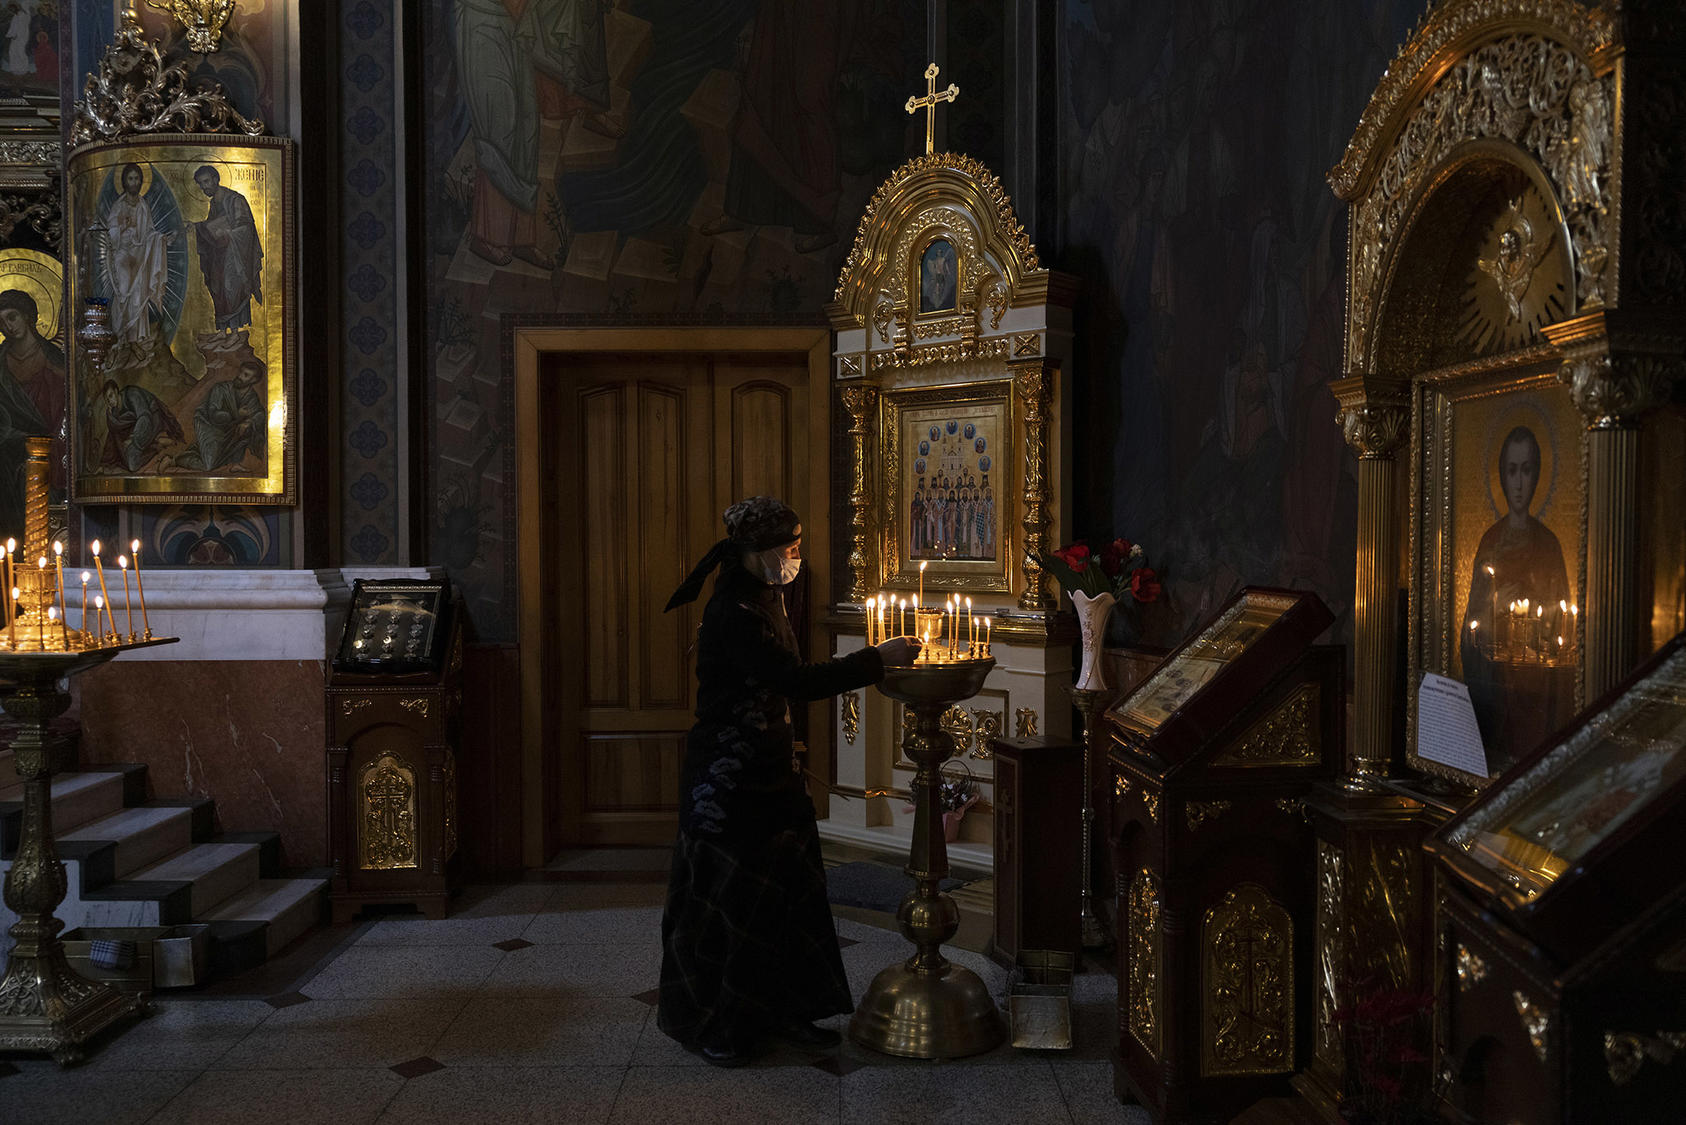 A woman lights a candle at the Holy Transfiguration Cathedral in Vinnytsia, Ukraine. March 12, 2022. (Ivor Prickett/The New York Times)